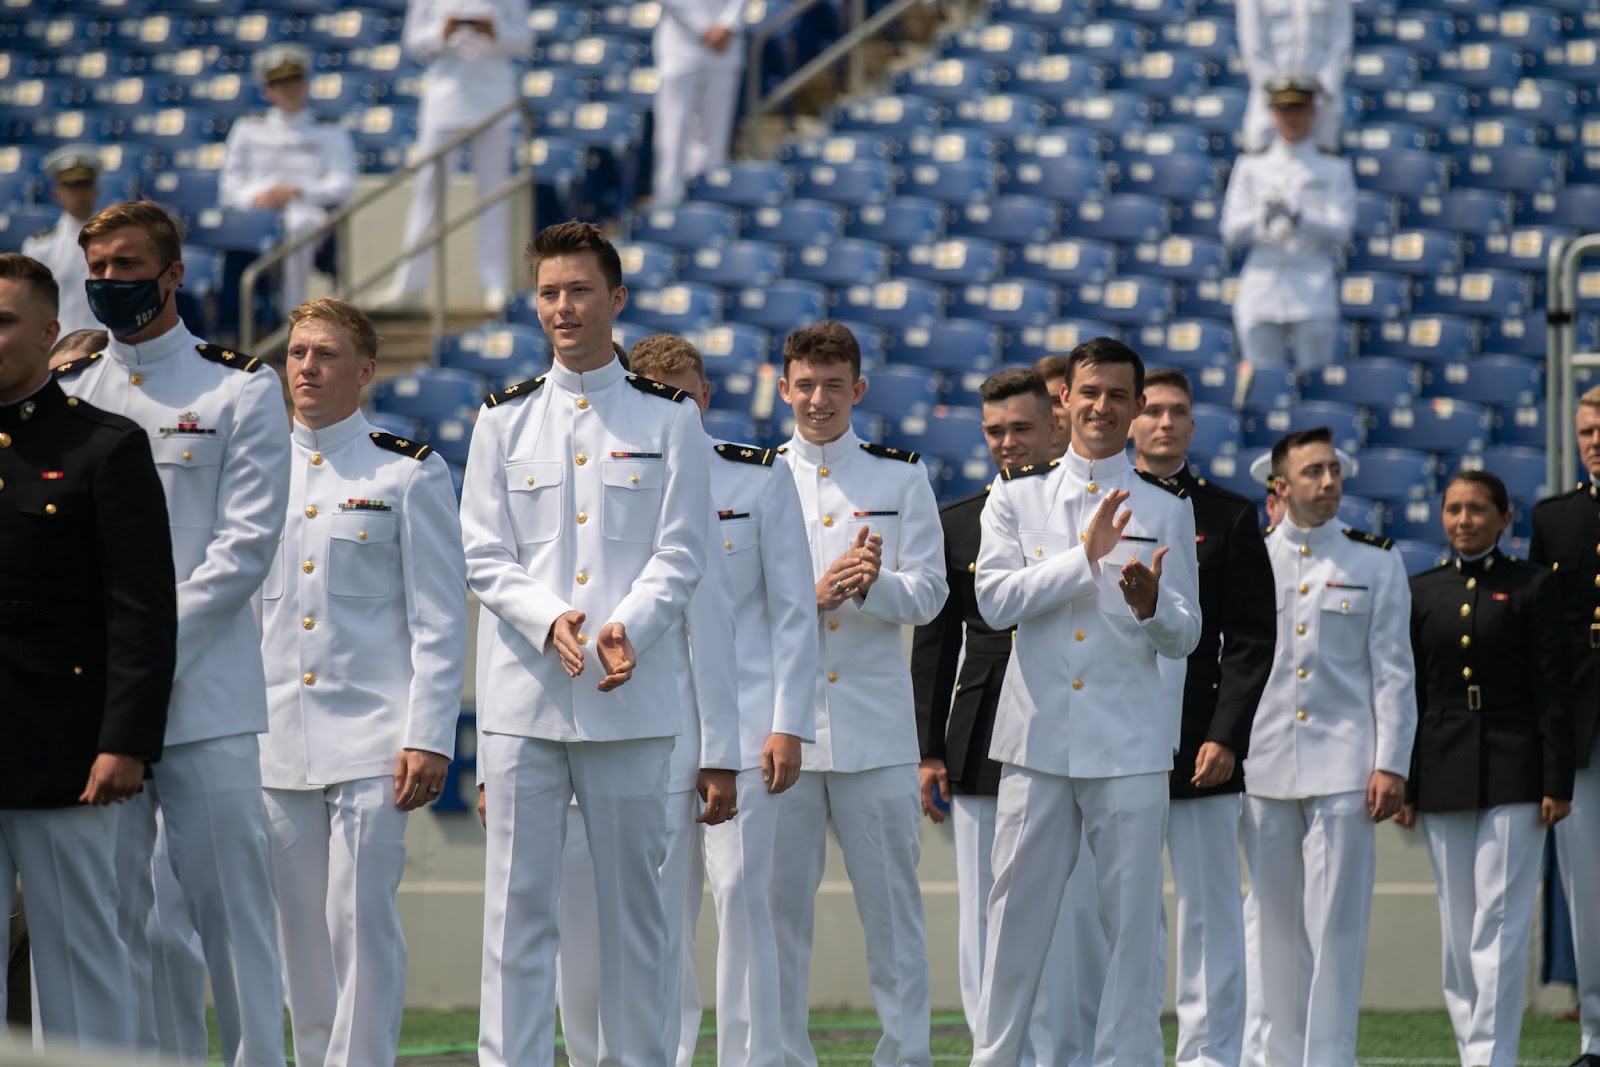 U S Naval Academy Uniforms What Each Means And The Differences Between Them